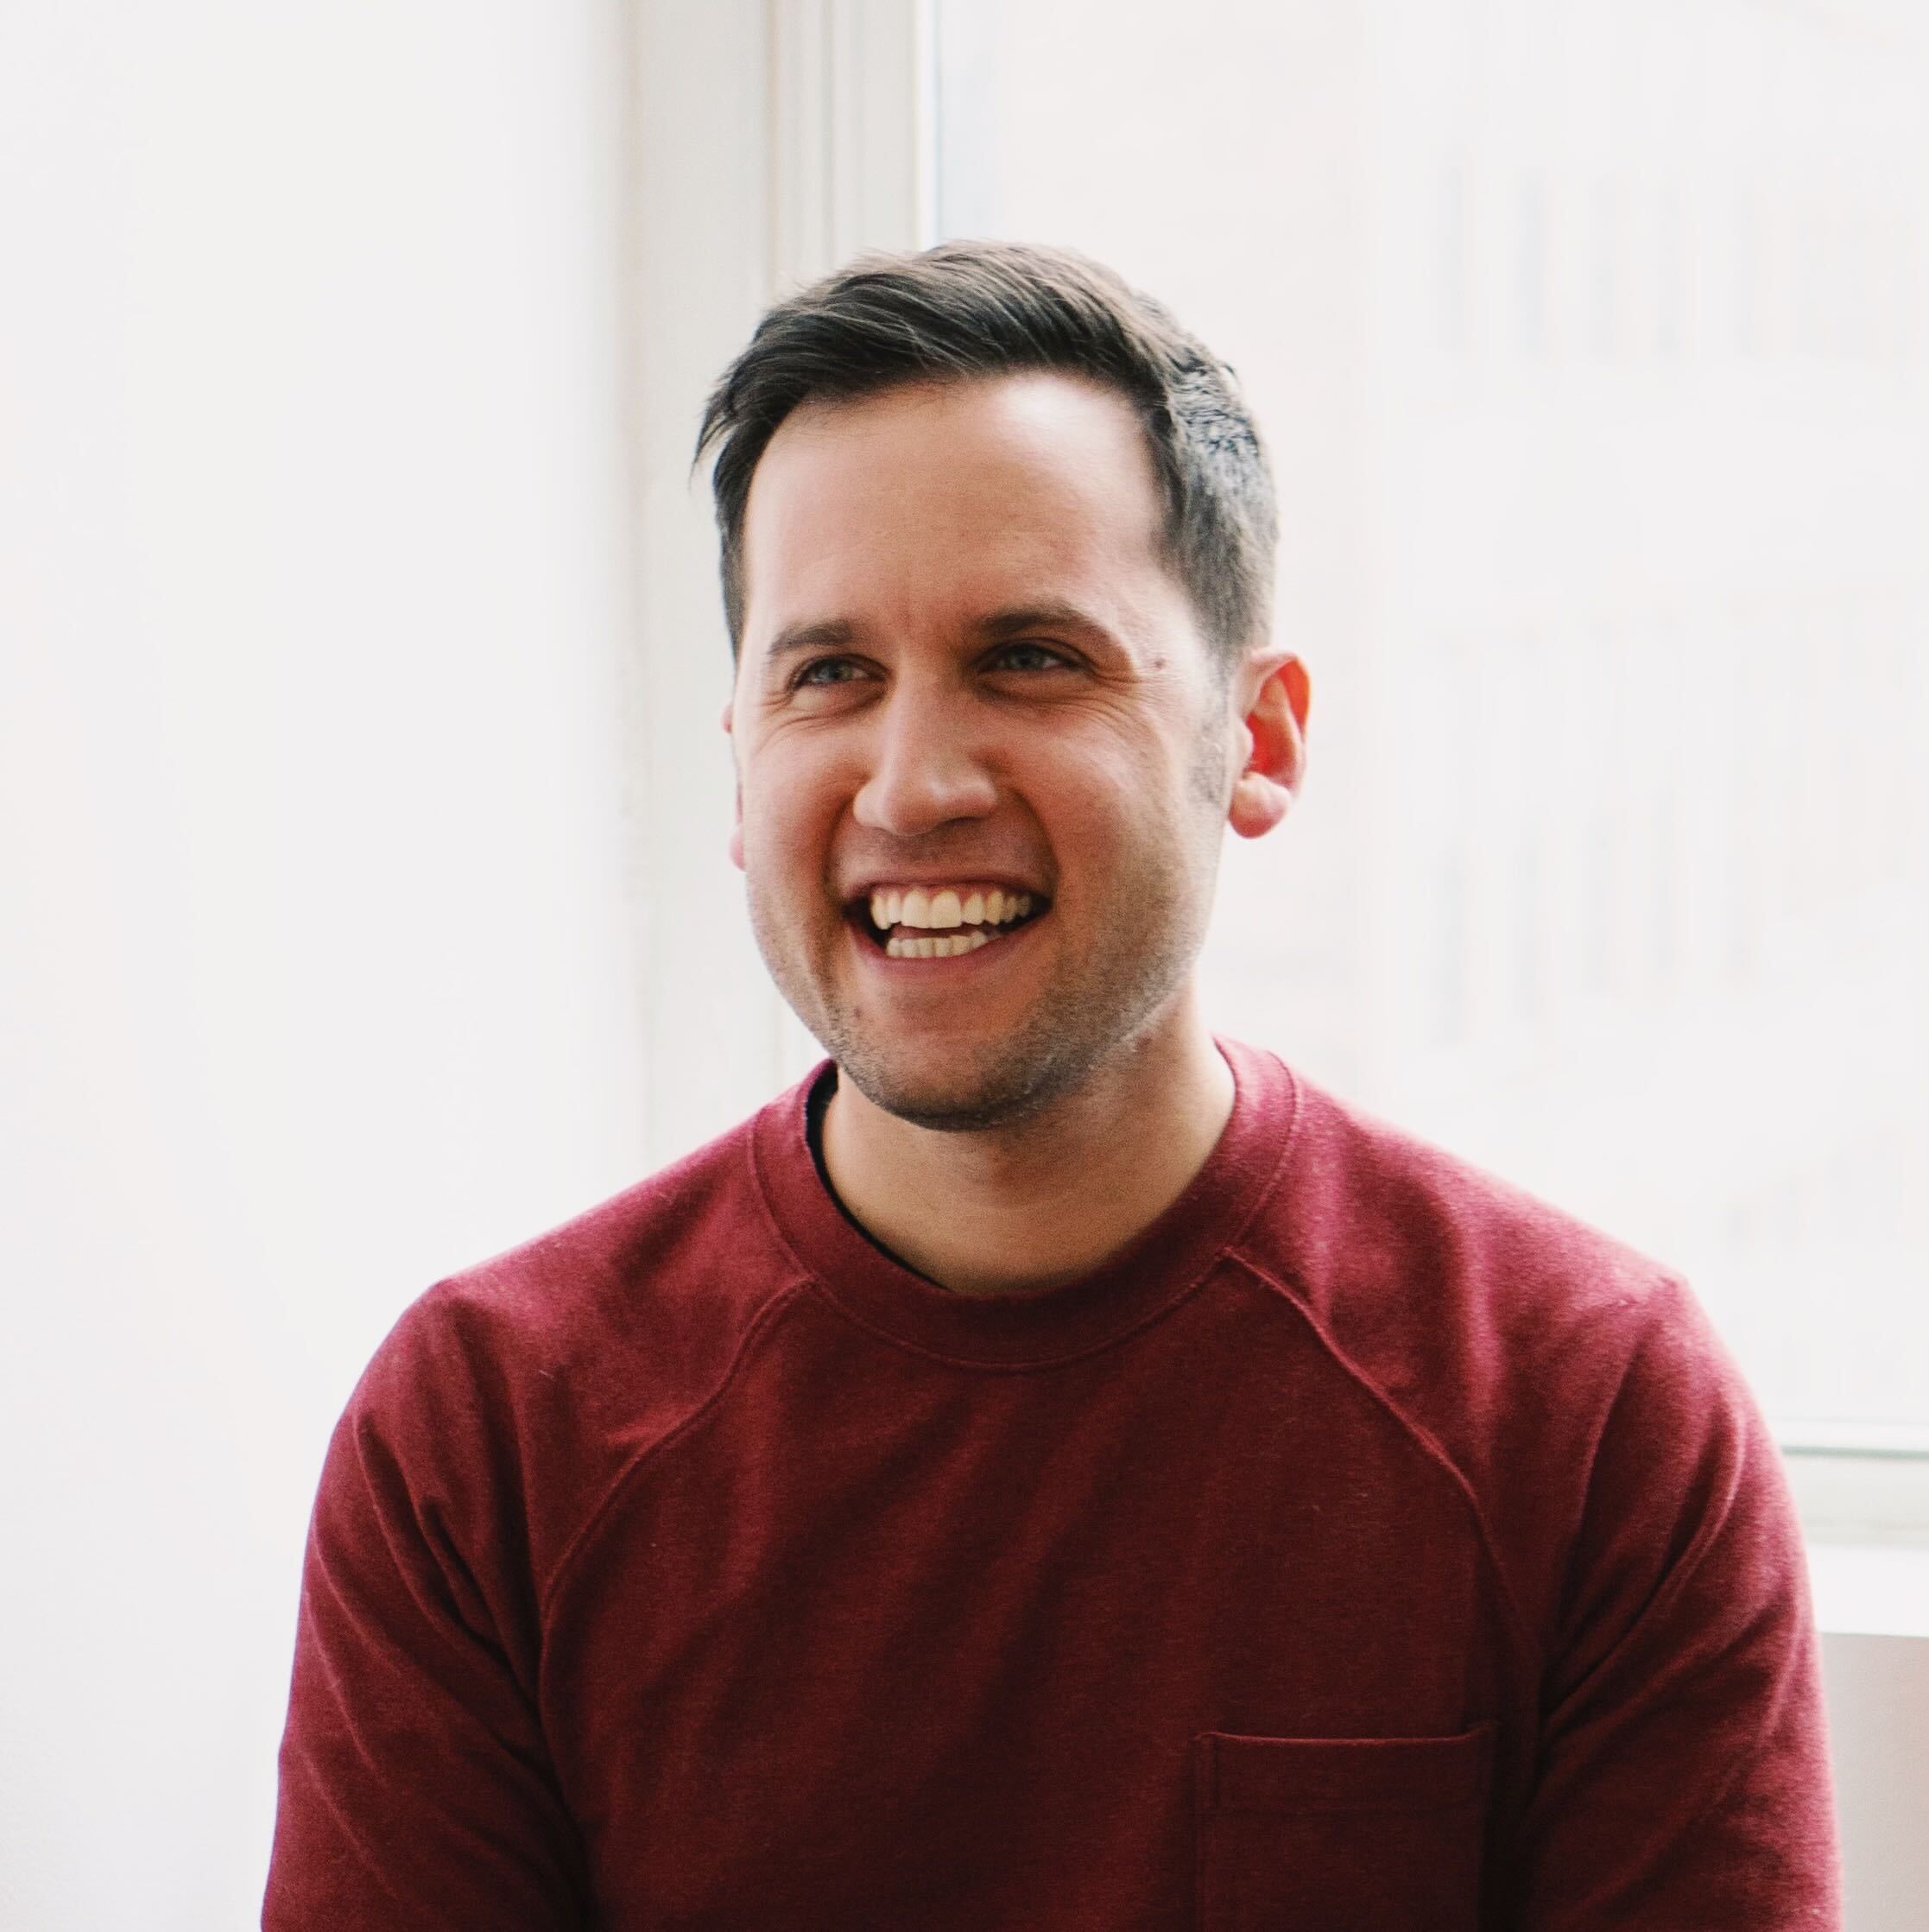 Lightspeed VC Michael Mignano on Why Apples Threats Influenced His Decision to Sell Anchor to Spotify, Why No FOMO in Venture is Good (AI Aside), & What NYC Founders Need to Realize